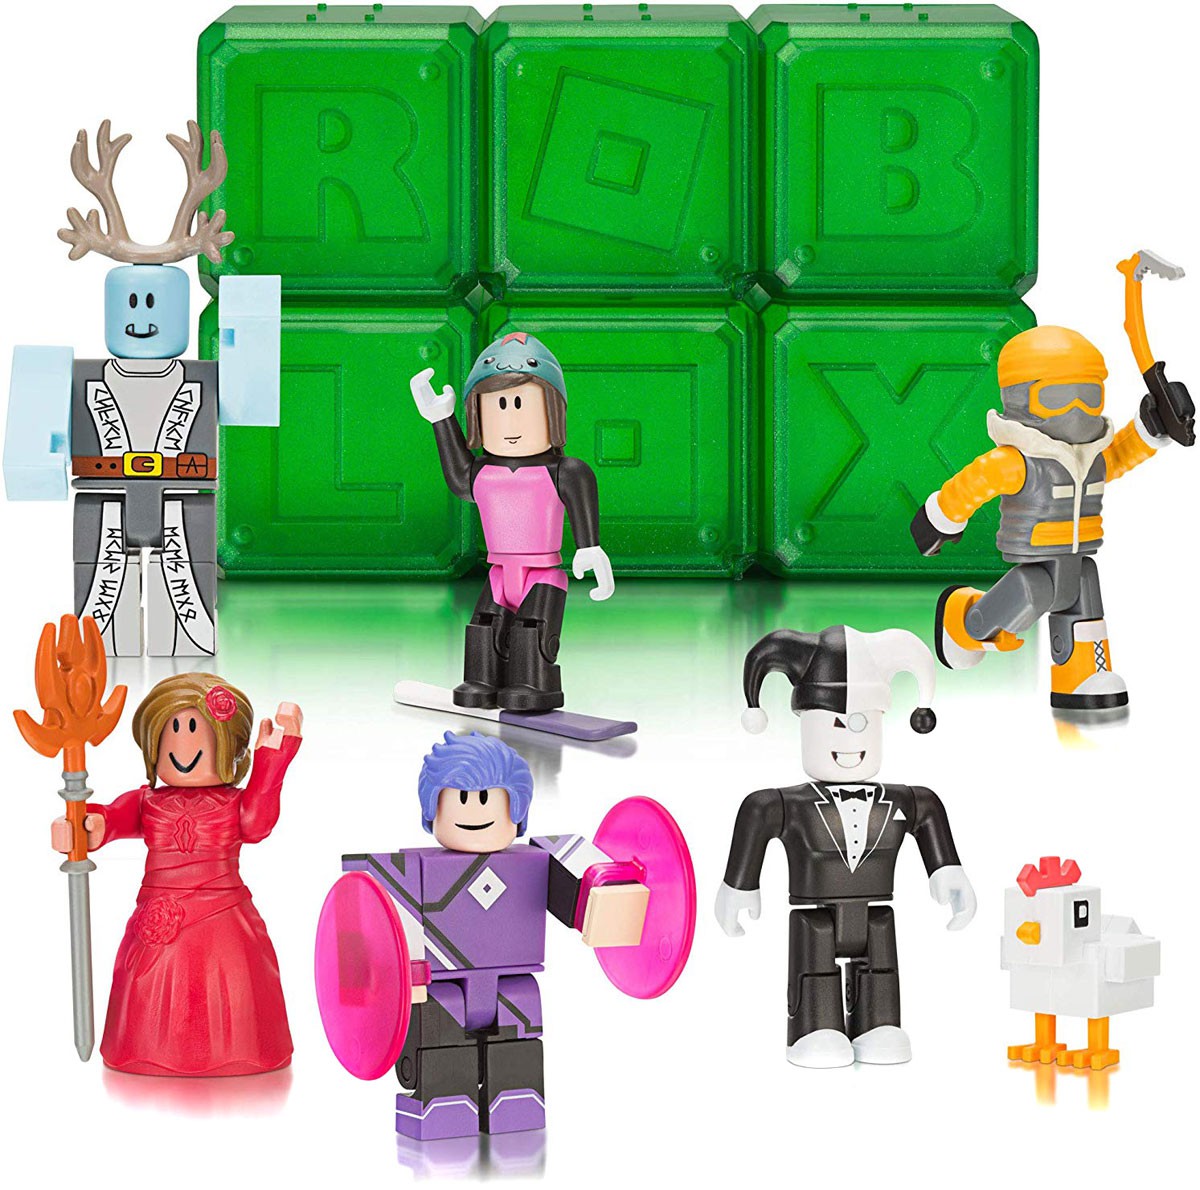 Roblox Series 4 Mystery Figure 6 Pack 191726006565 Ebay - 4x roblox celebrity series 1 blind bag exclusive building figure cake topper toy ebay